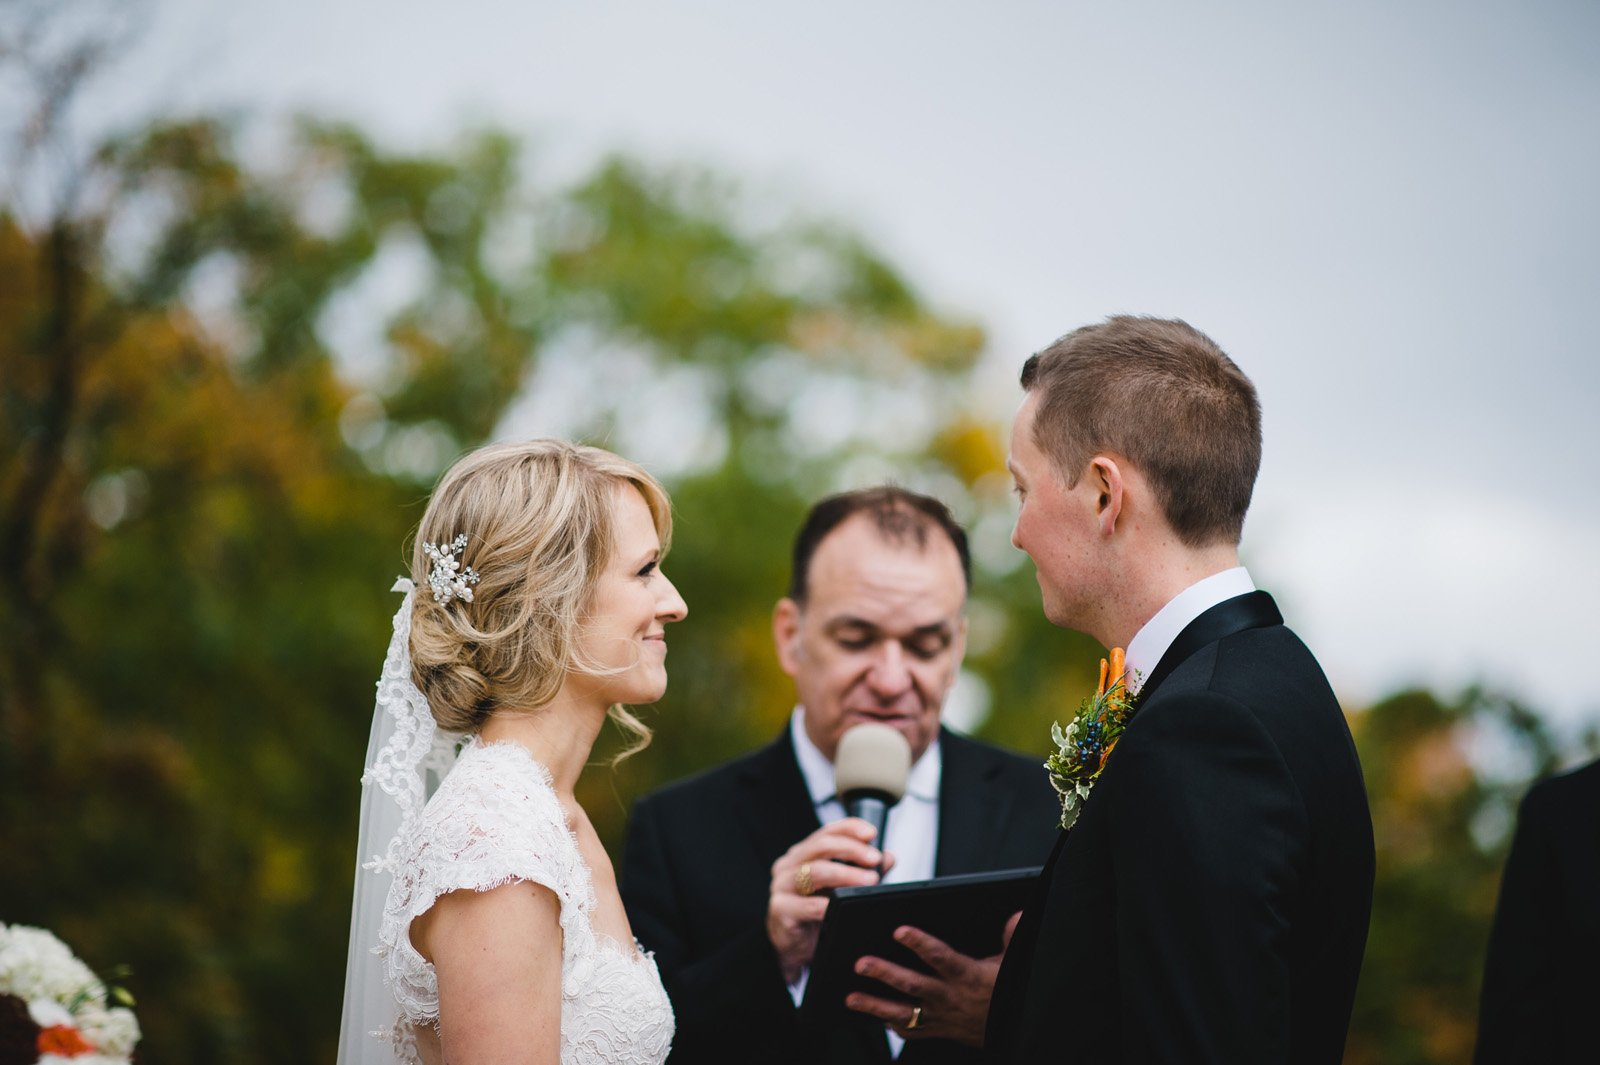 jill and mike say their vows | outdoor wedding ceremony in mississauga | toronto husband and wife photography team